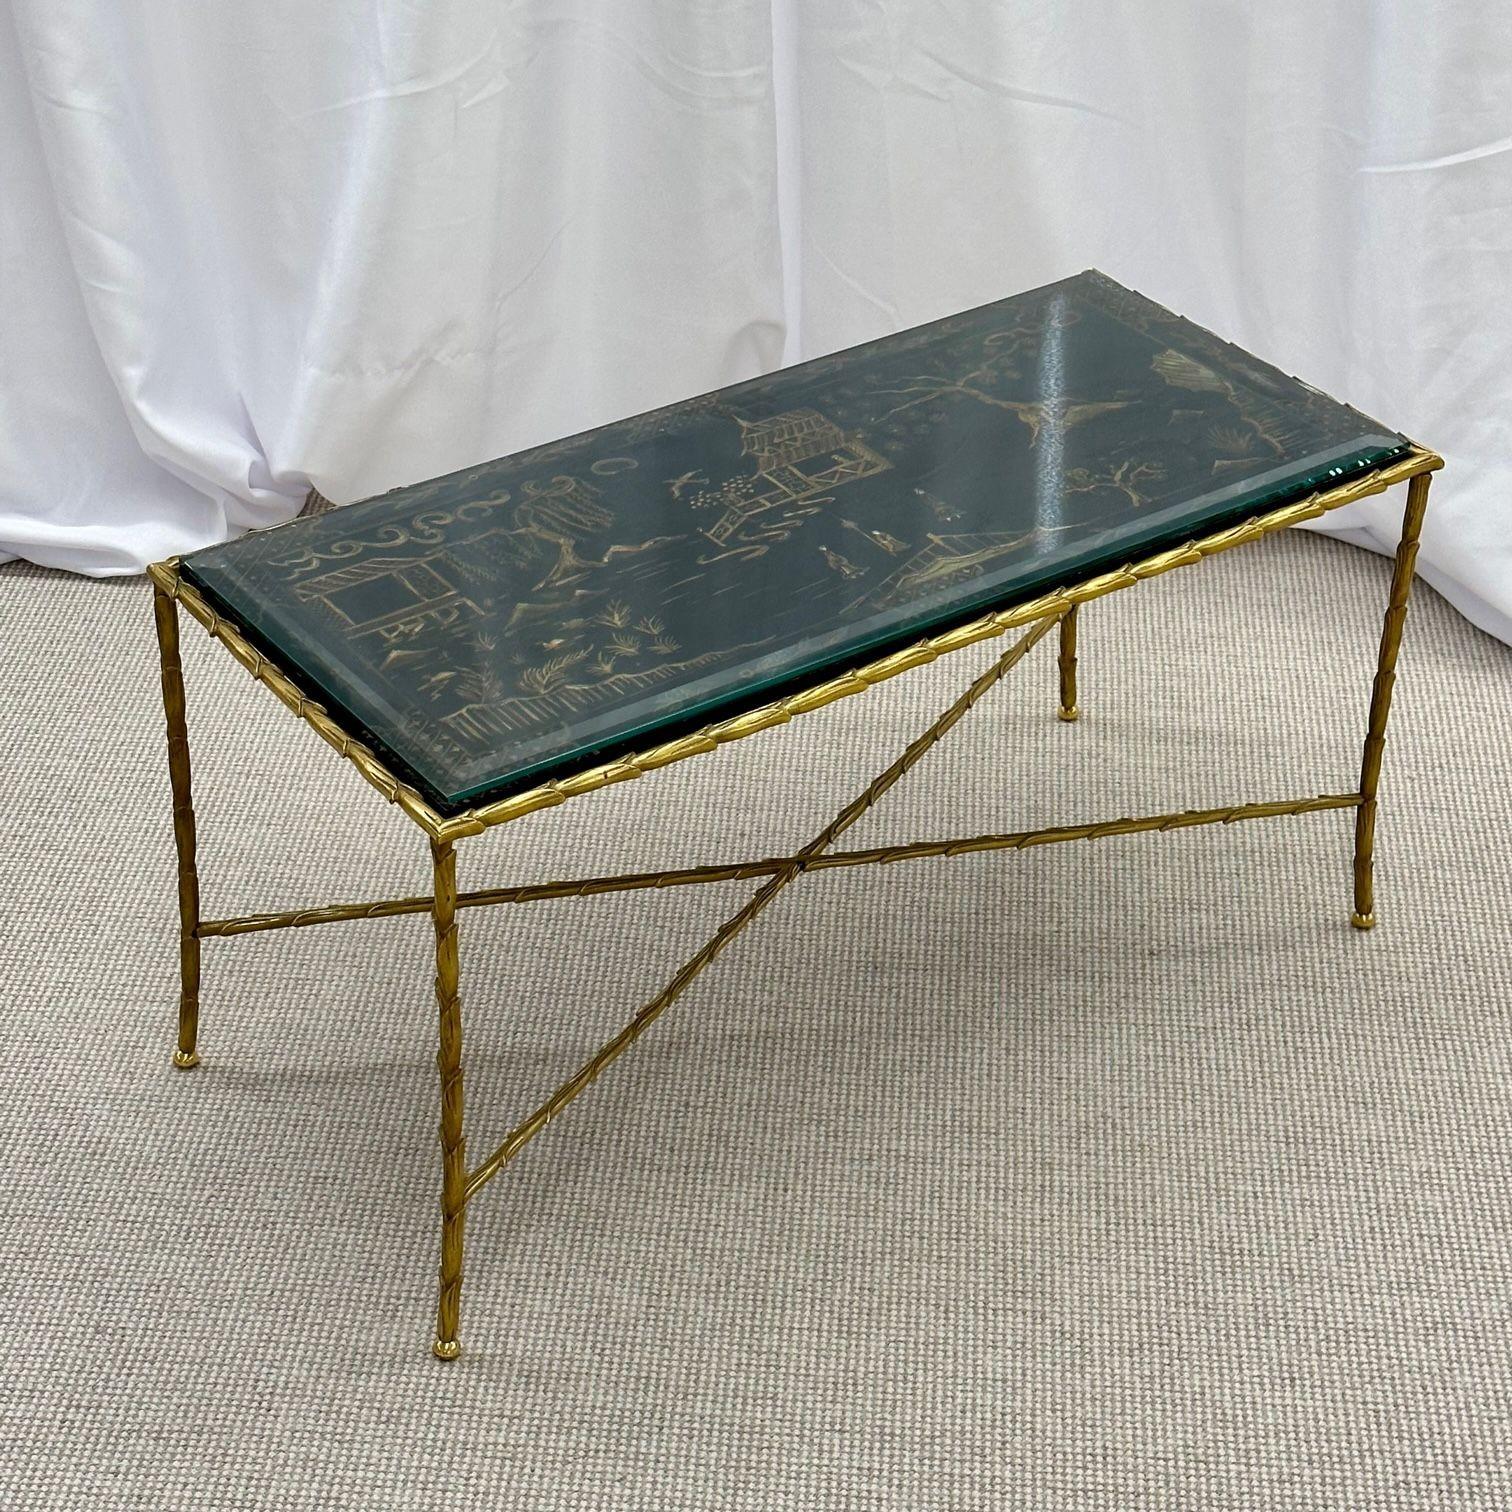 Maison Bagues coffee cocktail table, black japanned lacquer gilt metal low table.

Finest quality Bagues Japanned coffee or cocktail table having a lacquered Chinoiserie table top depicting raised figural scenes including houses, huts, trees and